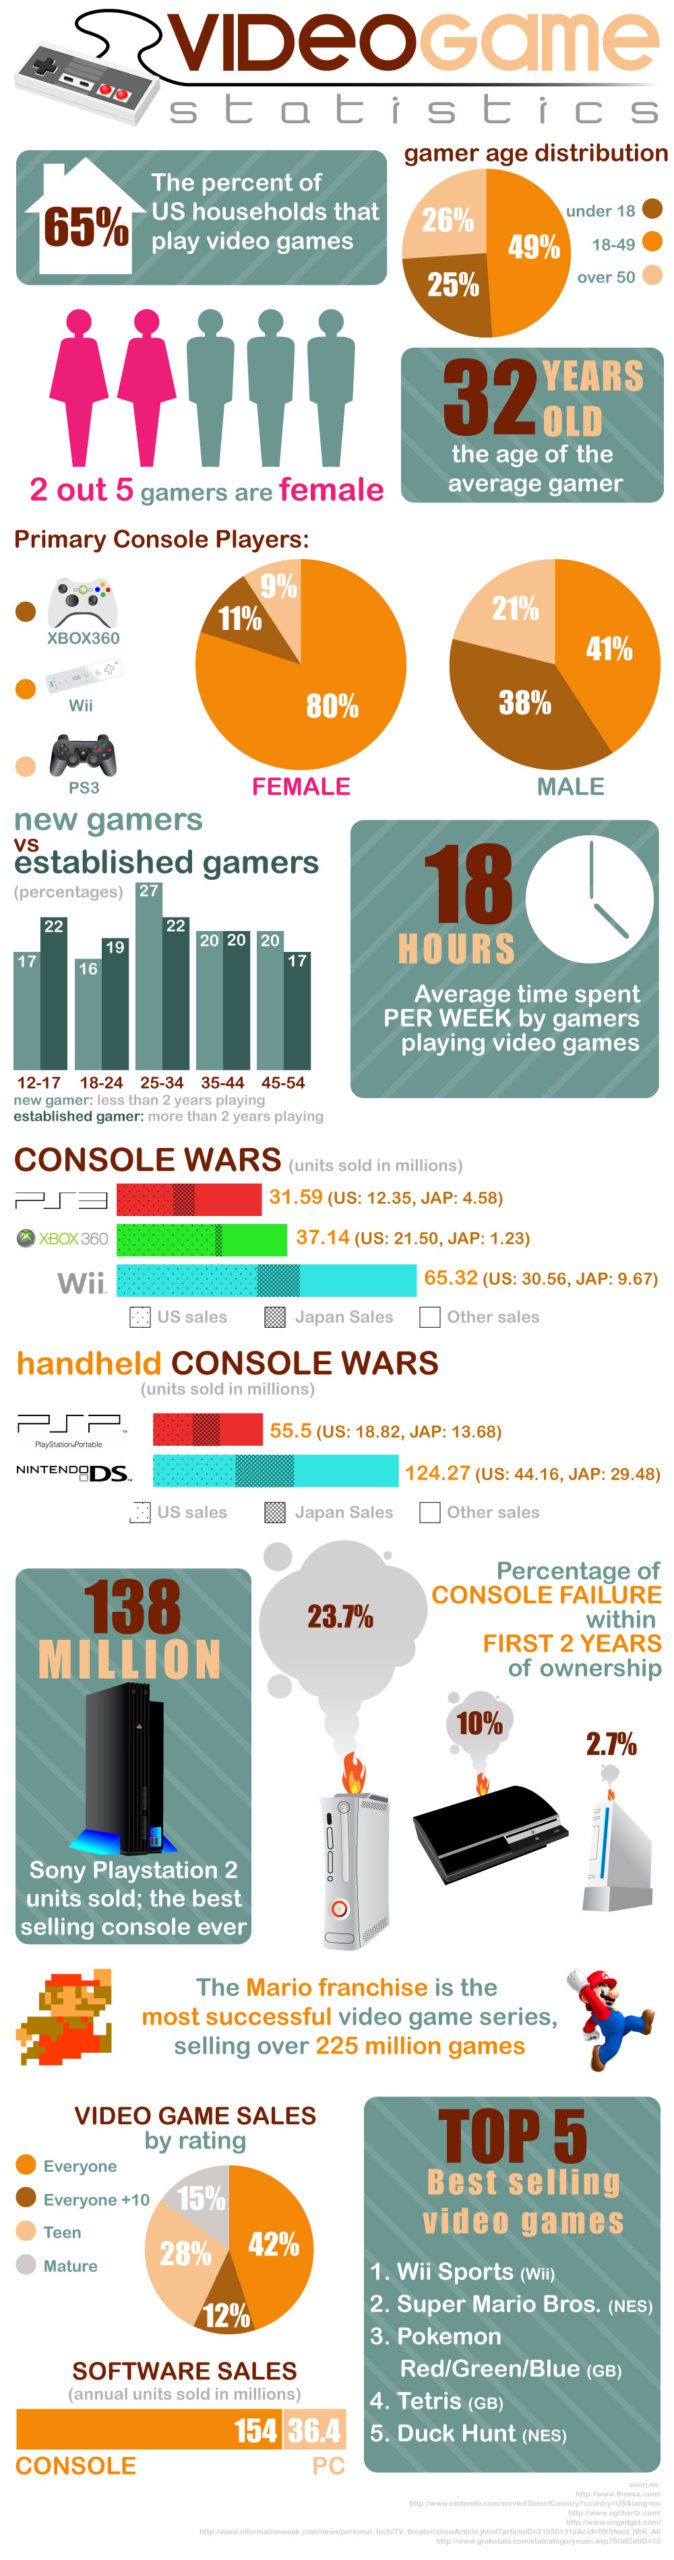 Gaming by the Numbers: Video Game Statistics